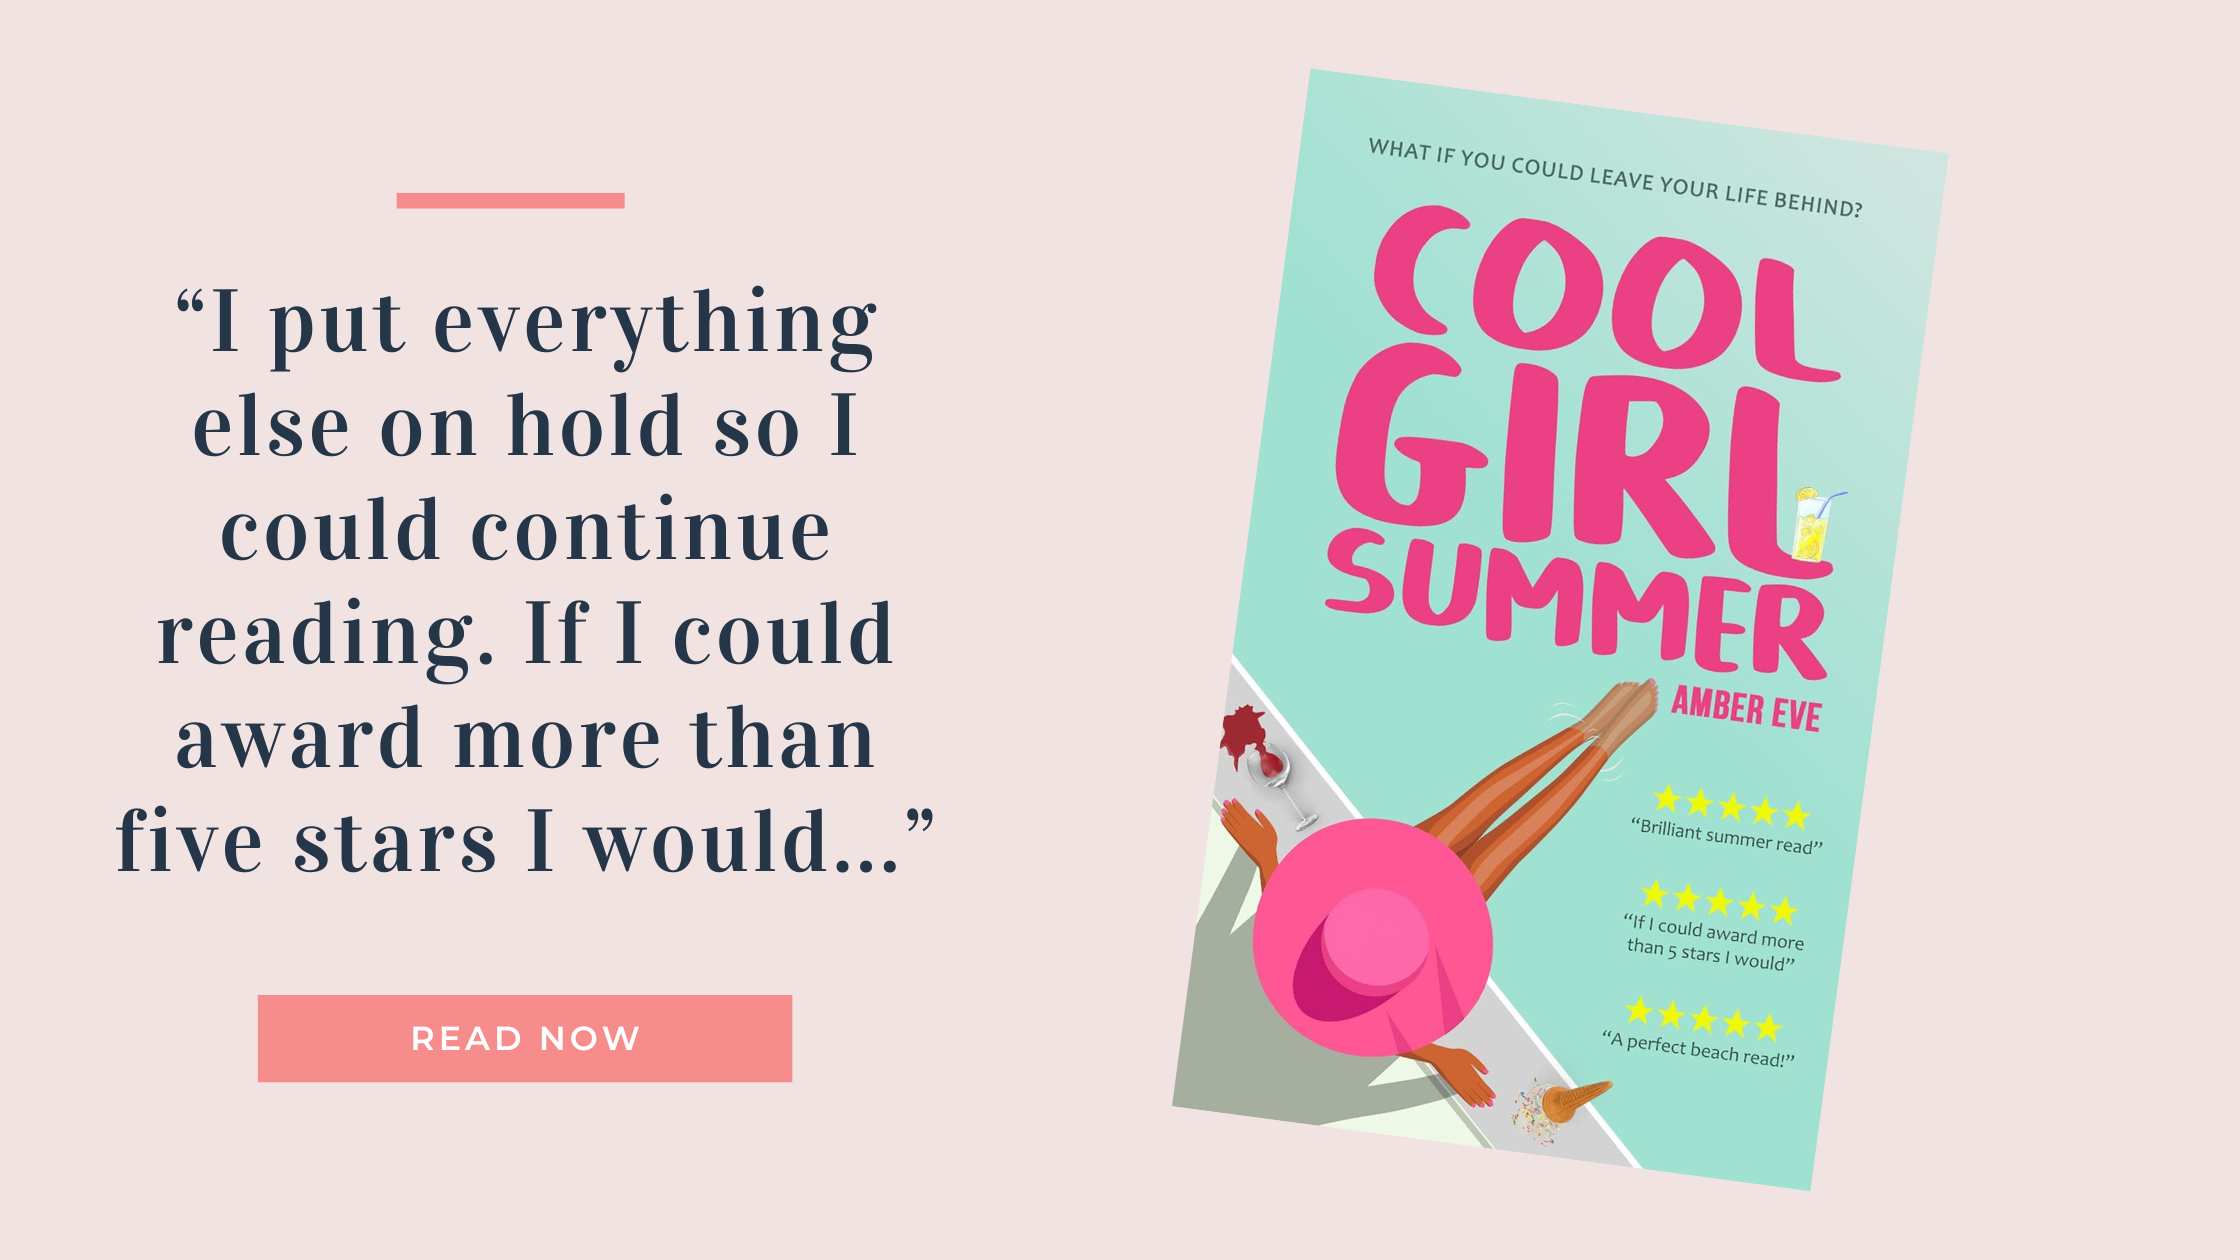 Praise for Cool Girl Summer by Amber Eve